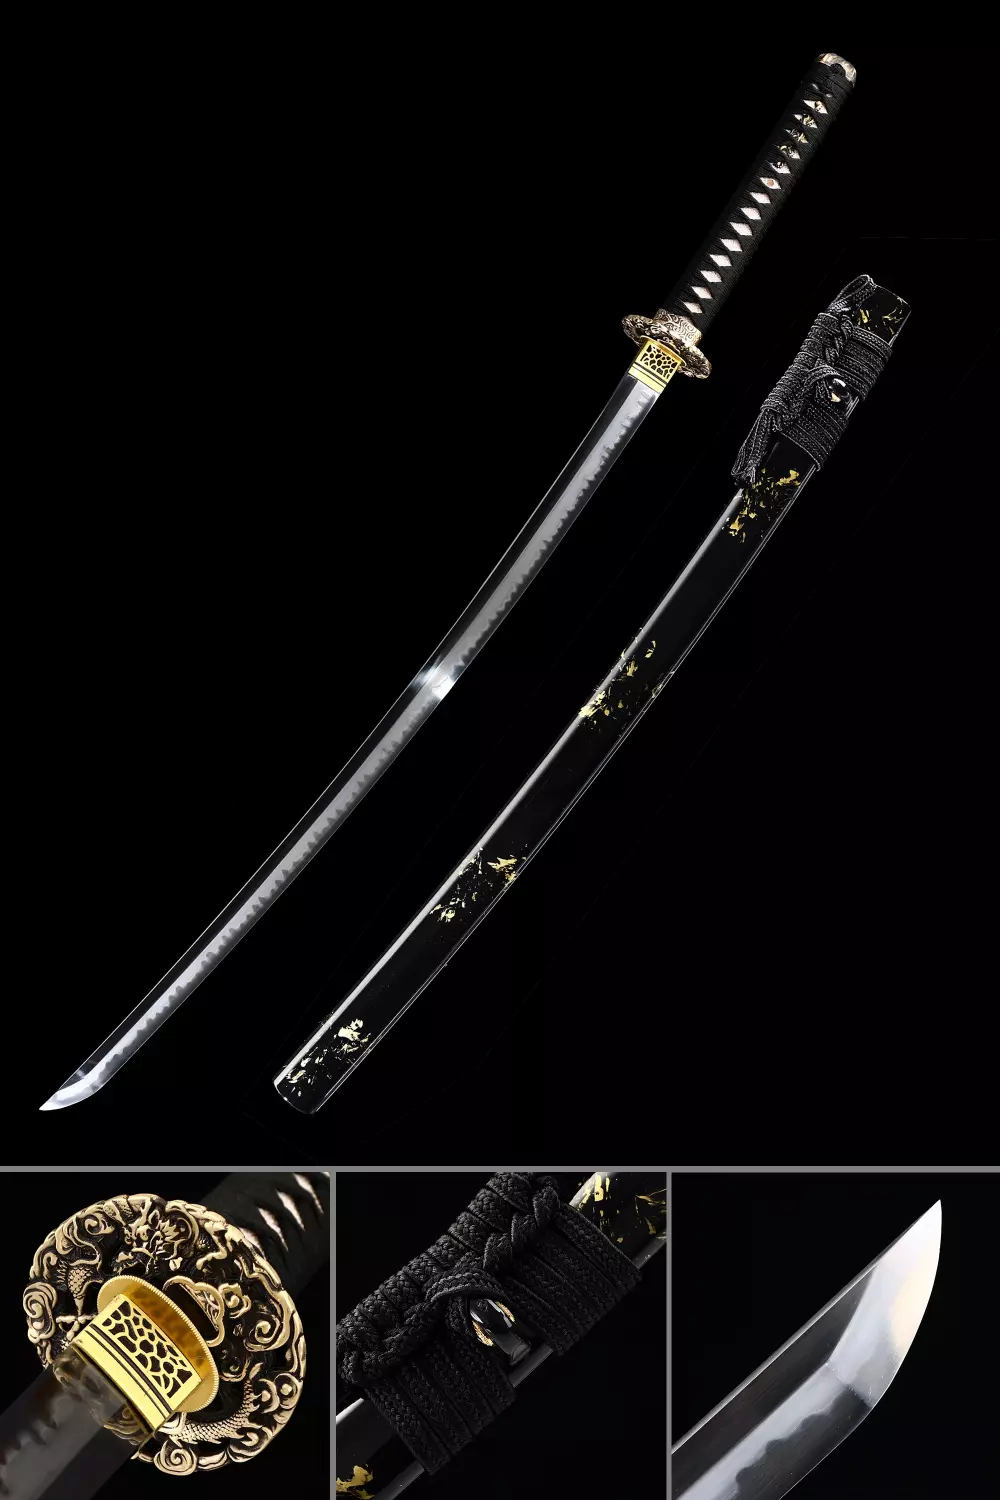 Samurai sword,Hand forged High carbon steel blade,Ebony scabbard – Chinese  Sword store